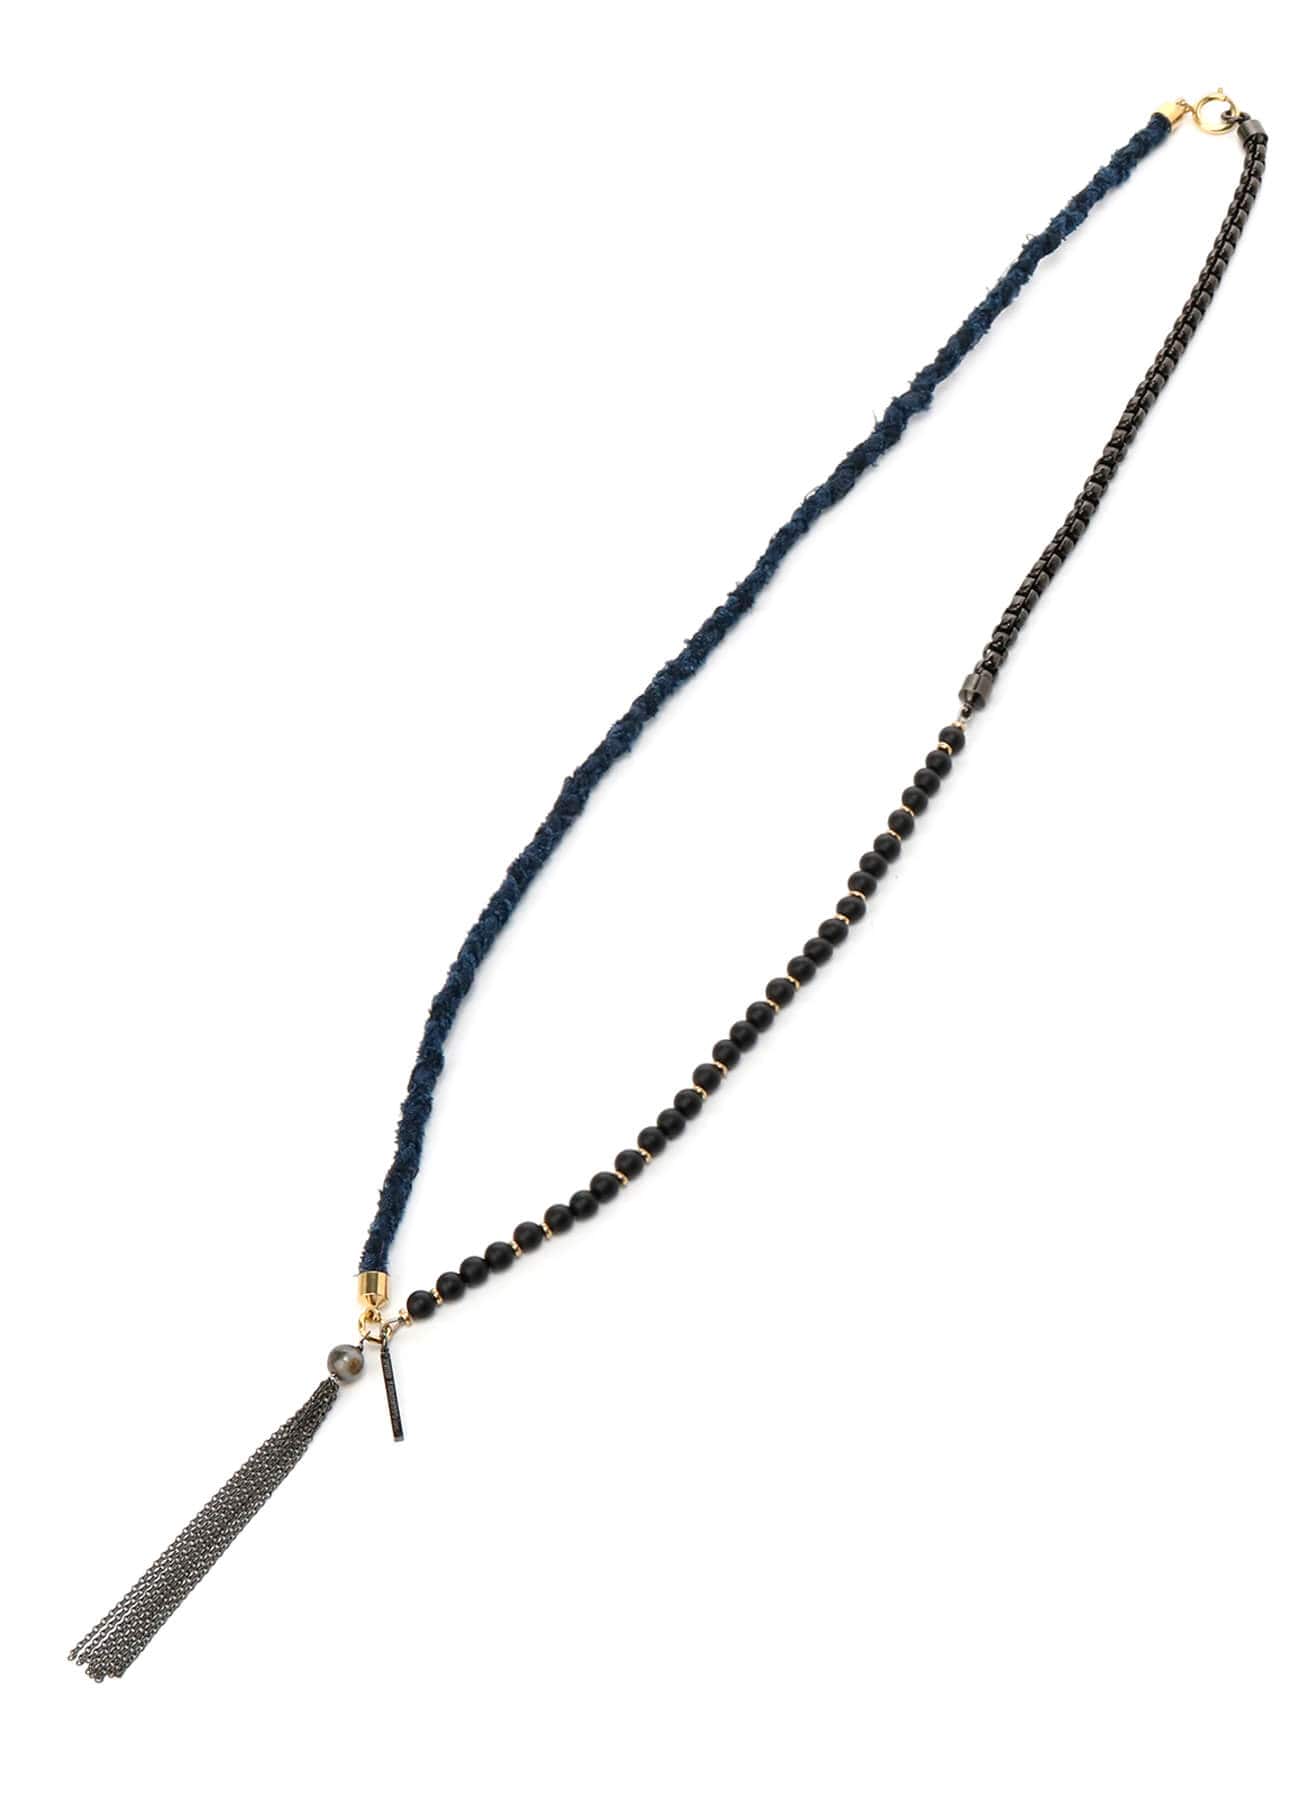 BORO One Tassel Frost Onyx Gold Brass Beads Necklace